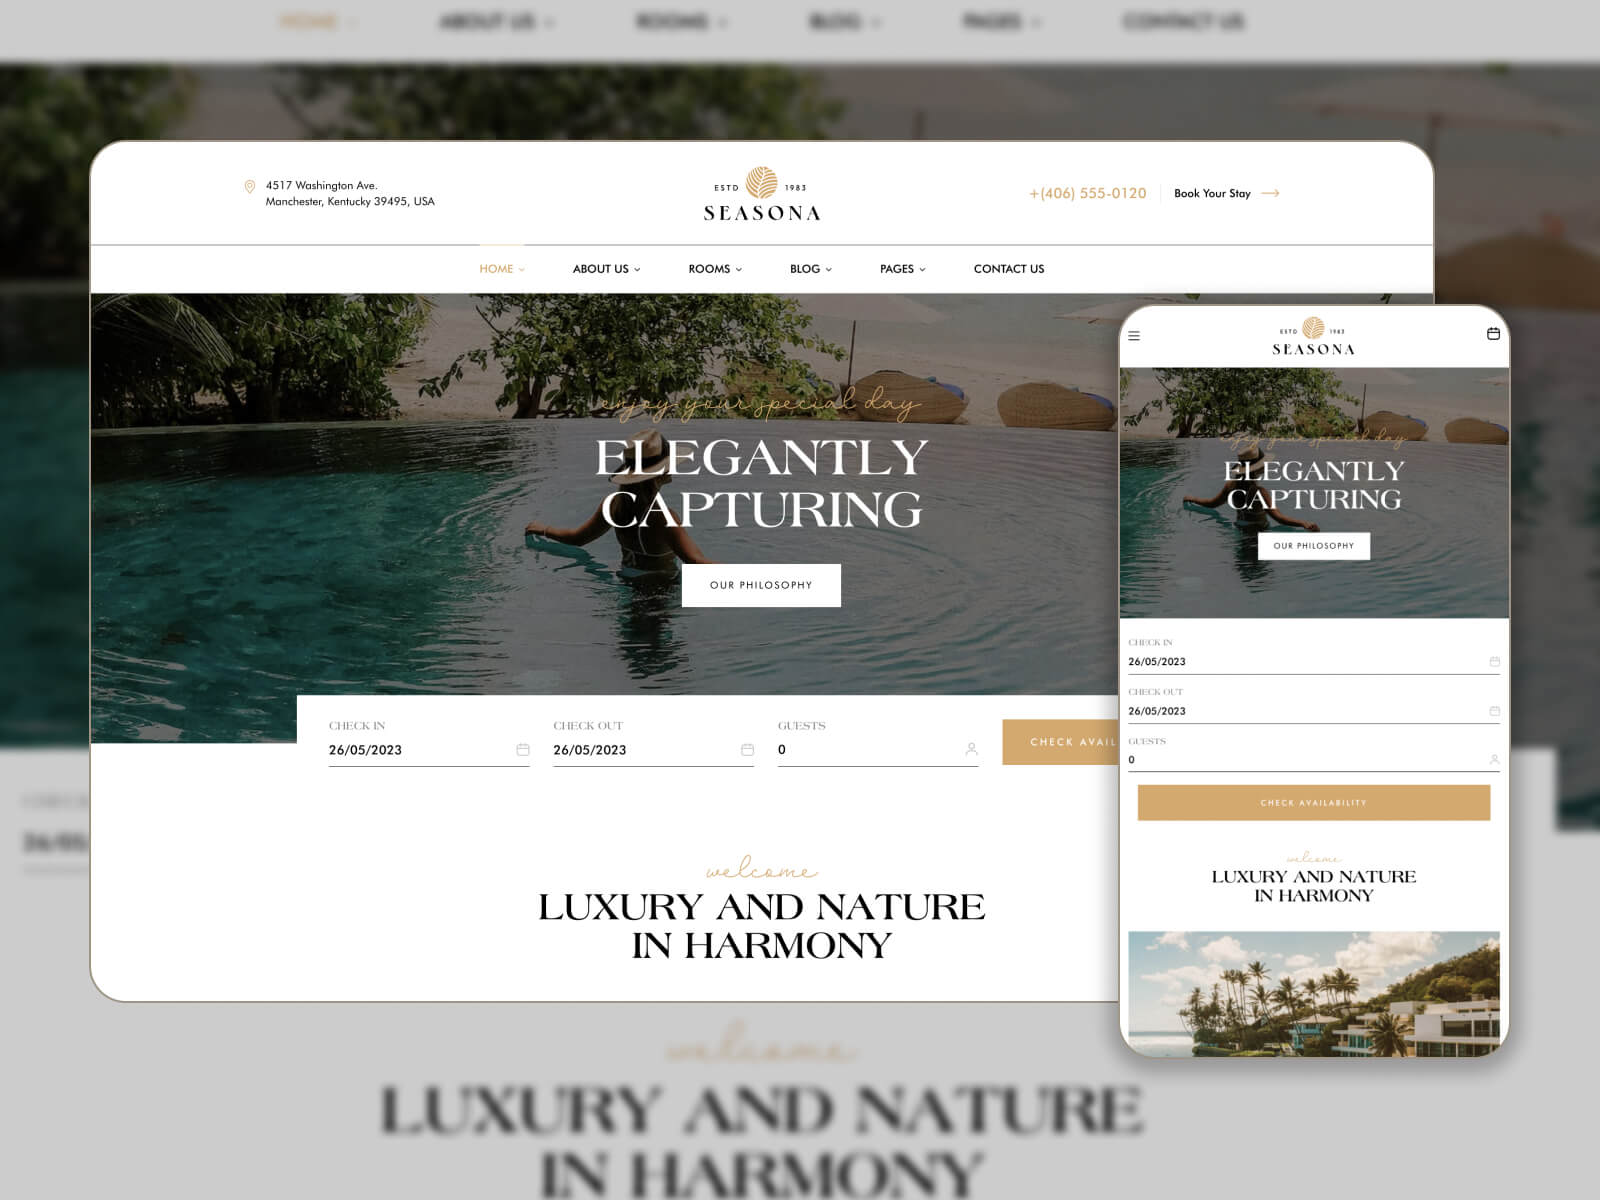 Picture of Seasona - responsive and retina-ready booking website template for WordPress in lightgray, dimgray, rosybrown, white, and black color scheme